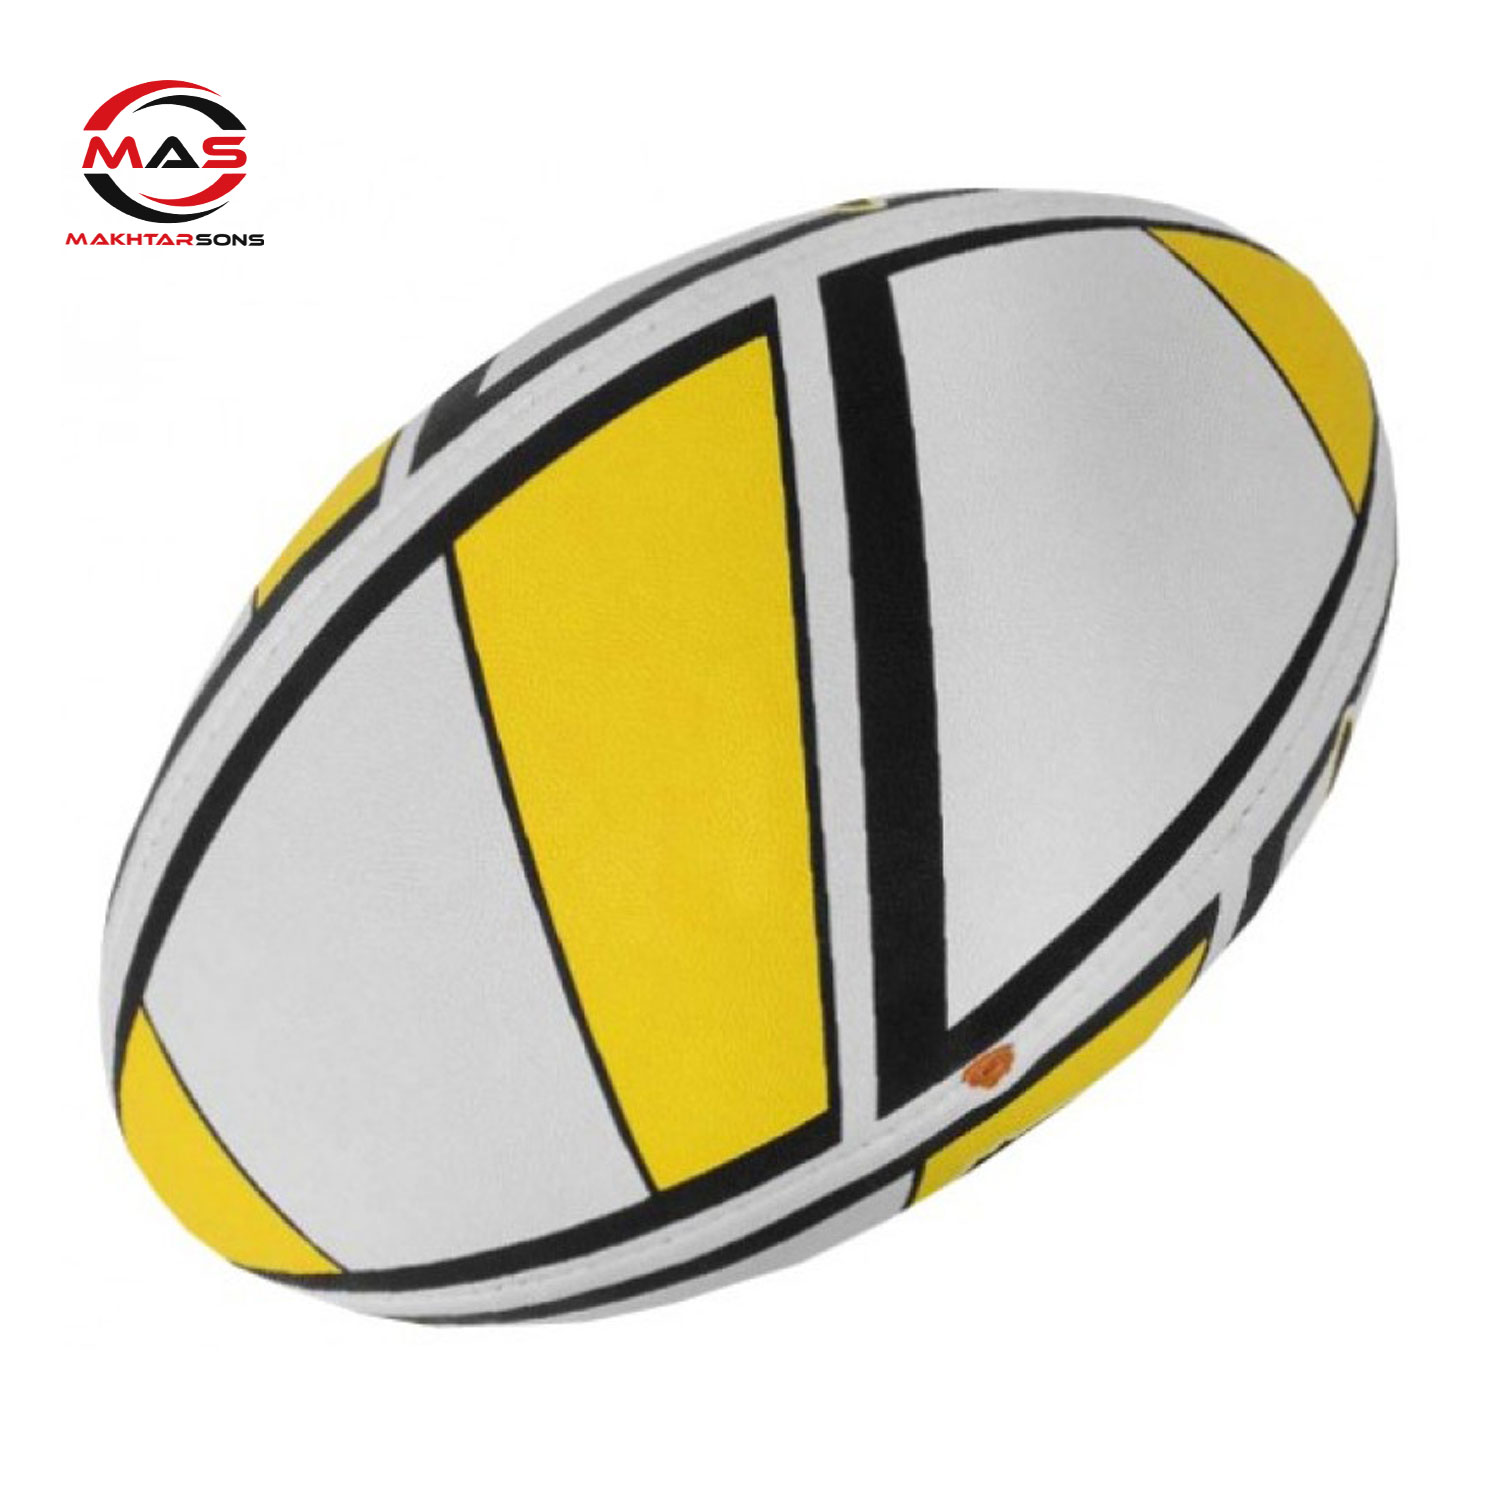 RUGBY BALL | MAS 431